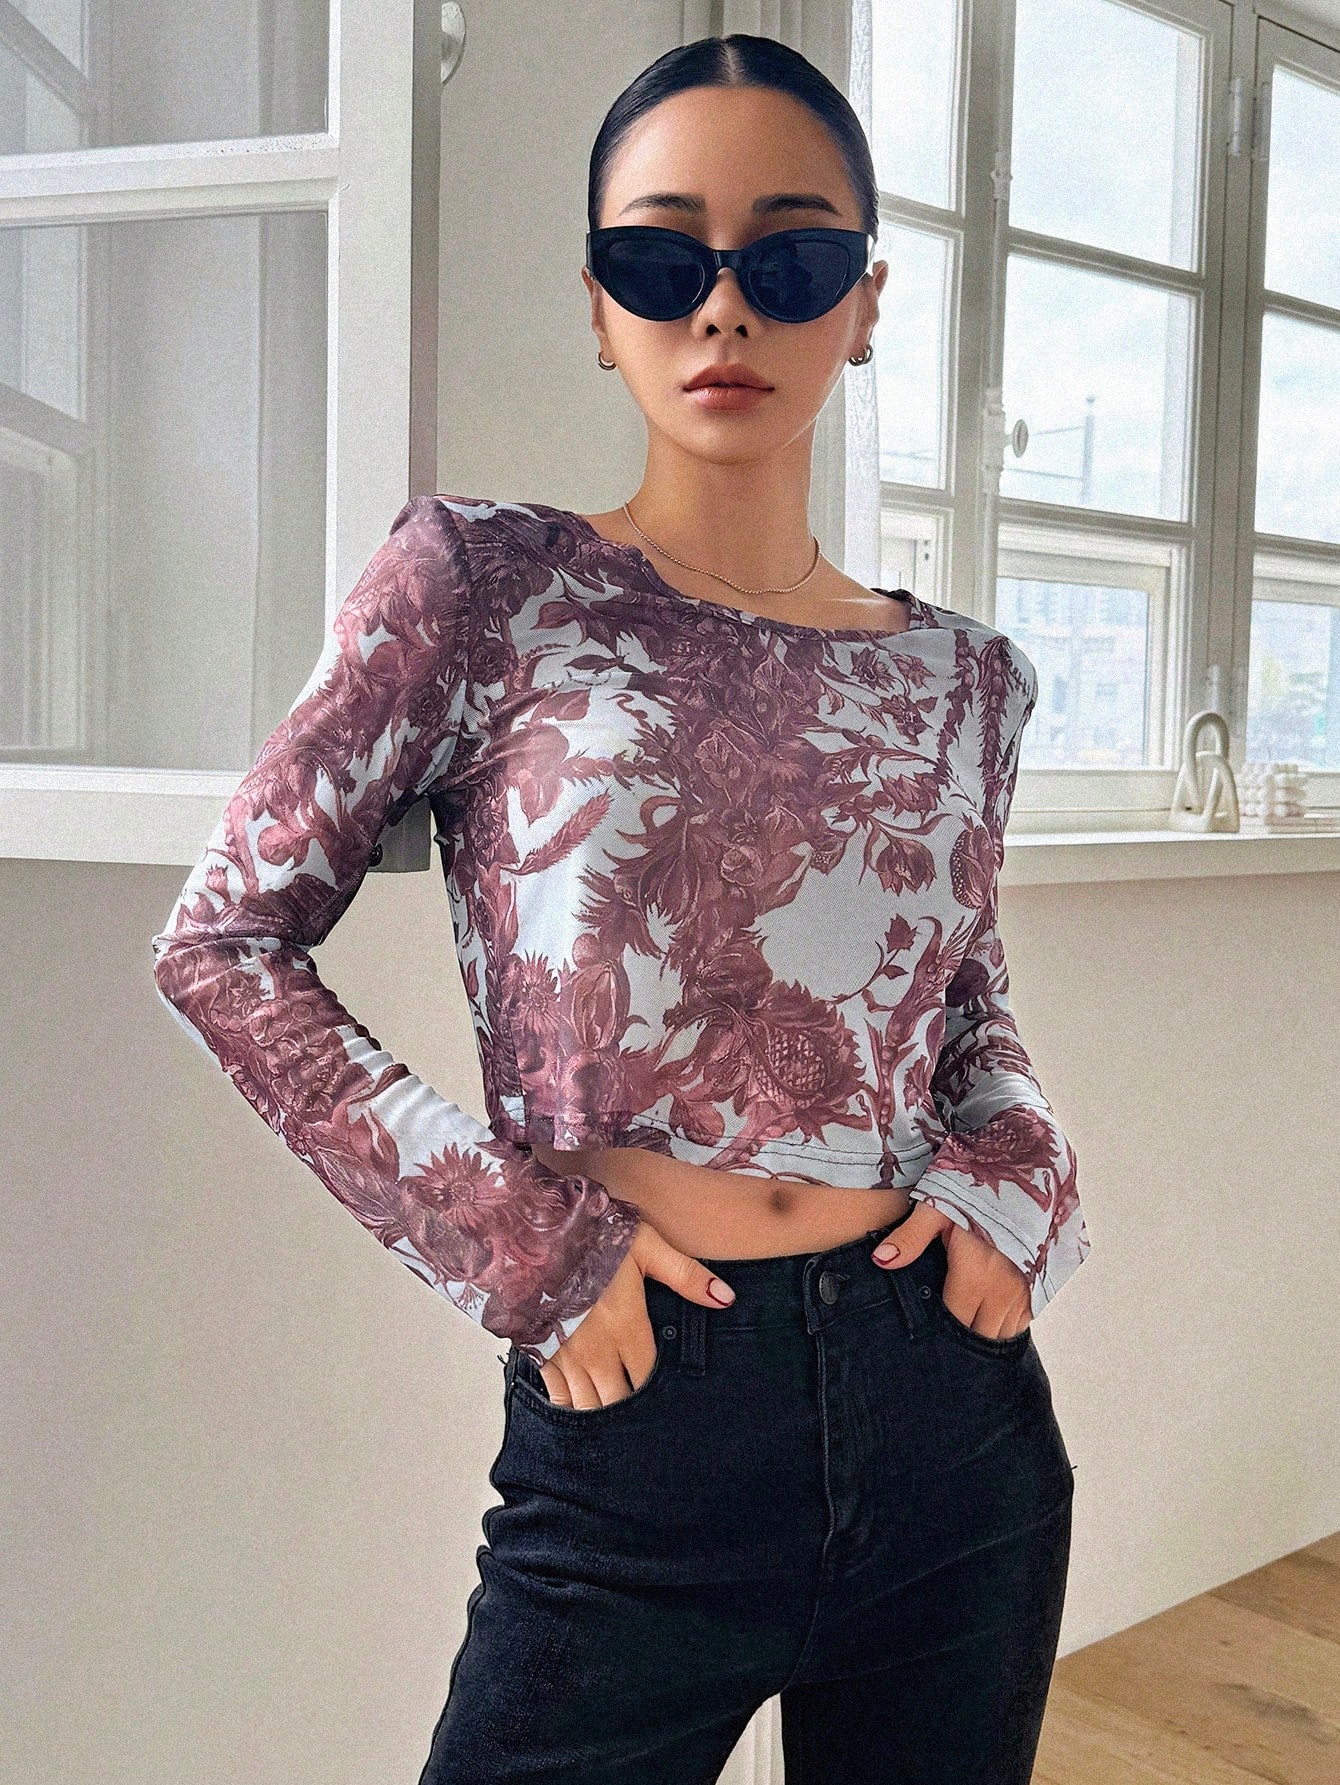 Full-Body Floral Mesh Sheer Long Sleeve Round Neck Cropped Women Top